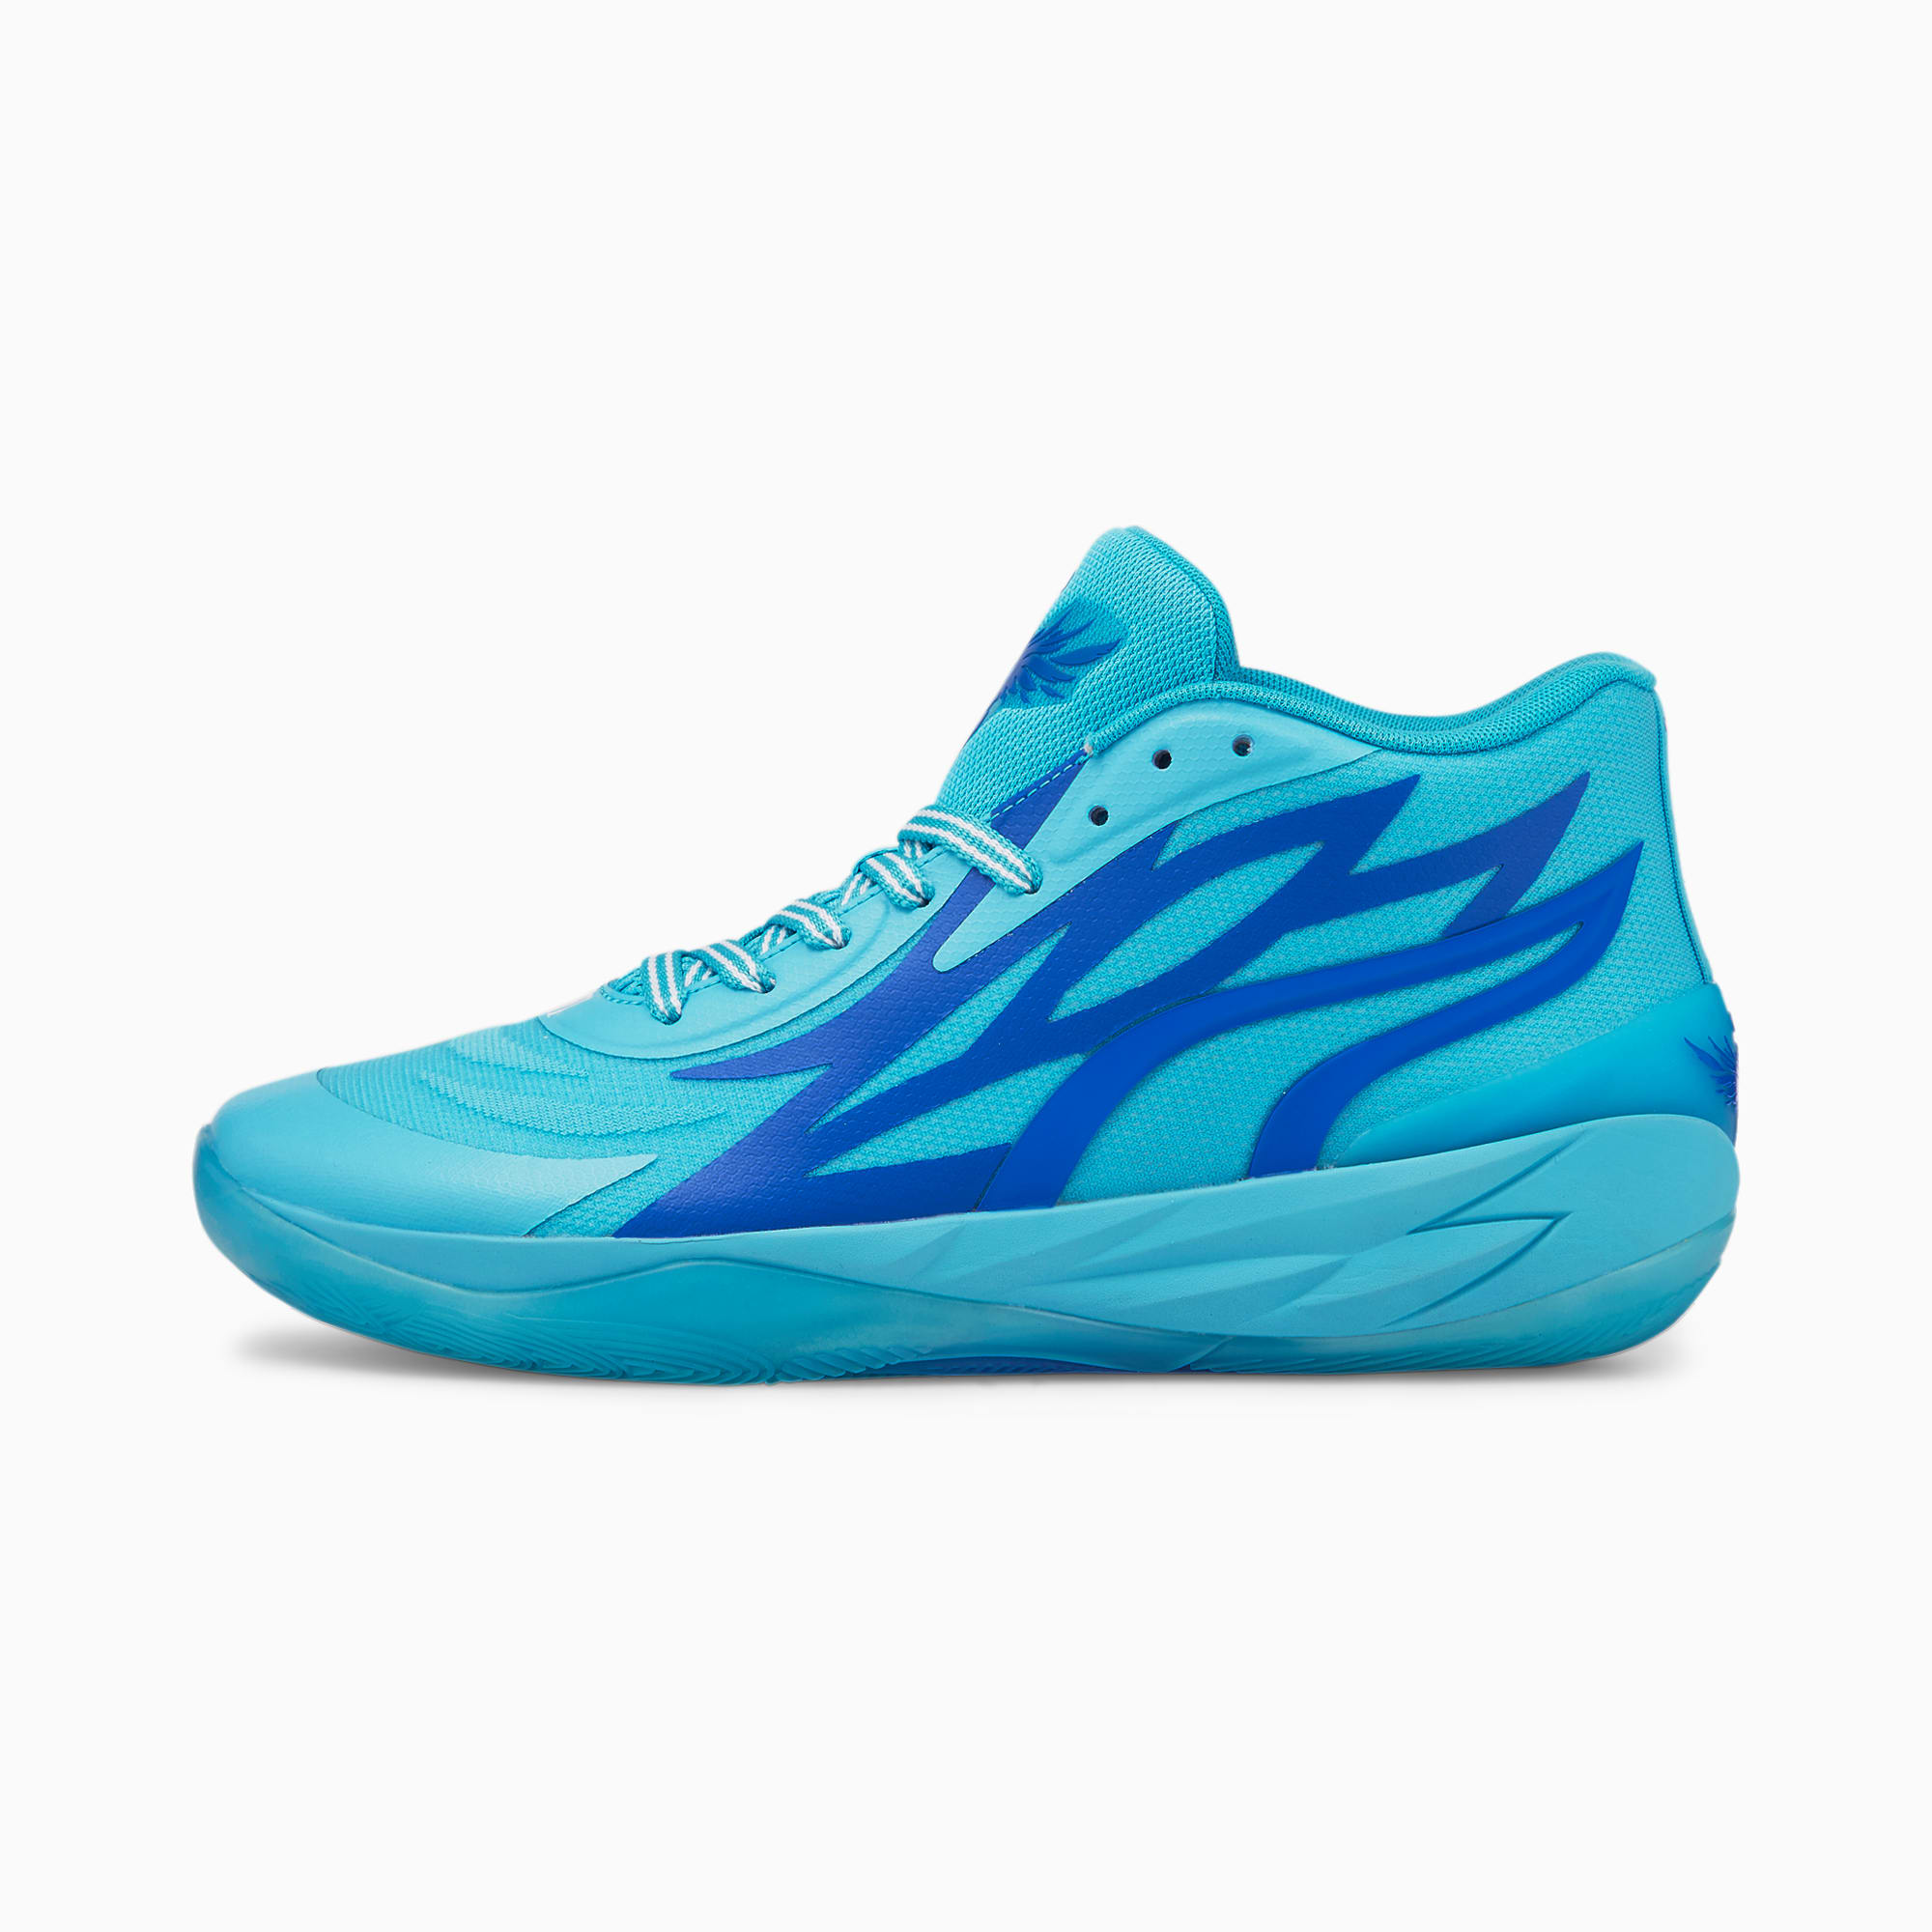 MB.02 ROTY Basketball Shoes